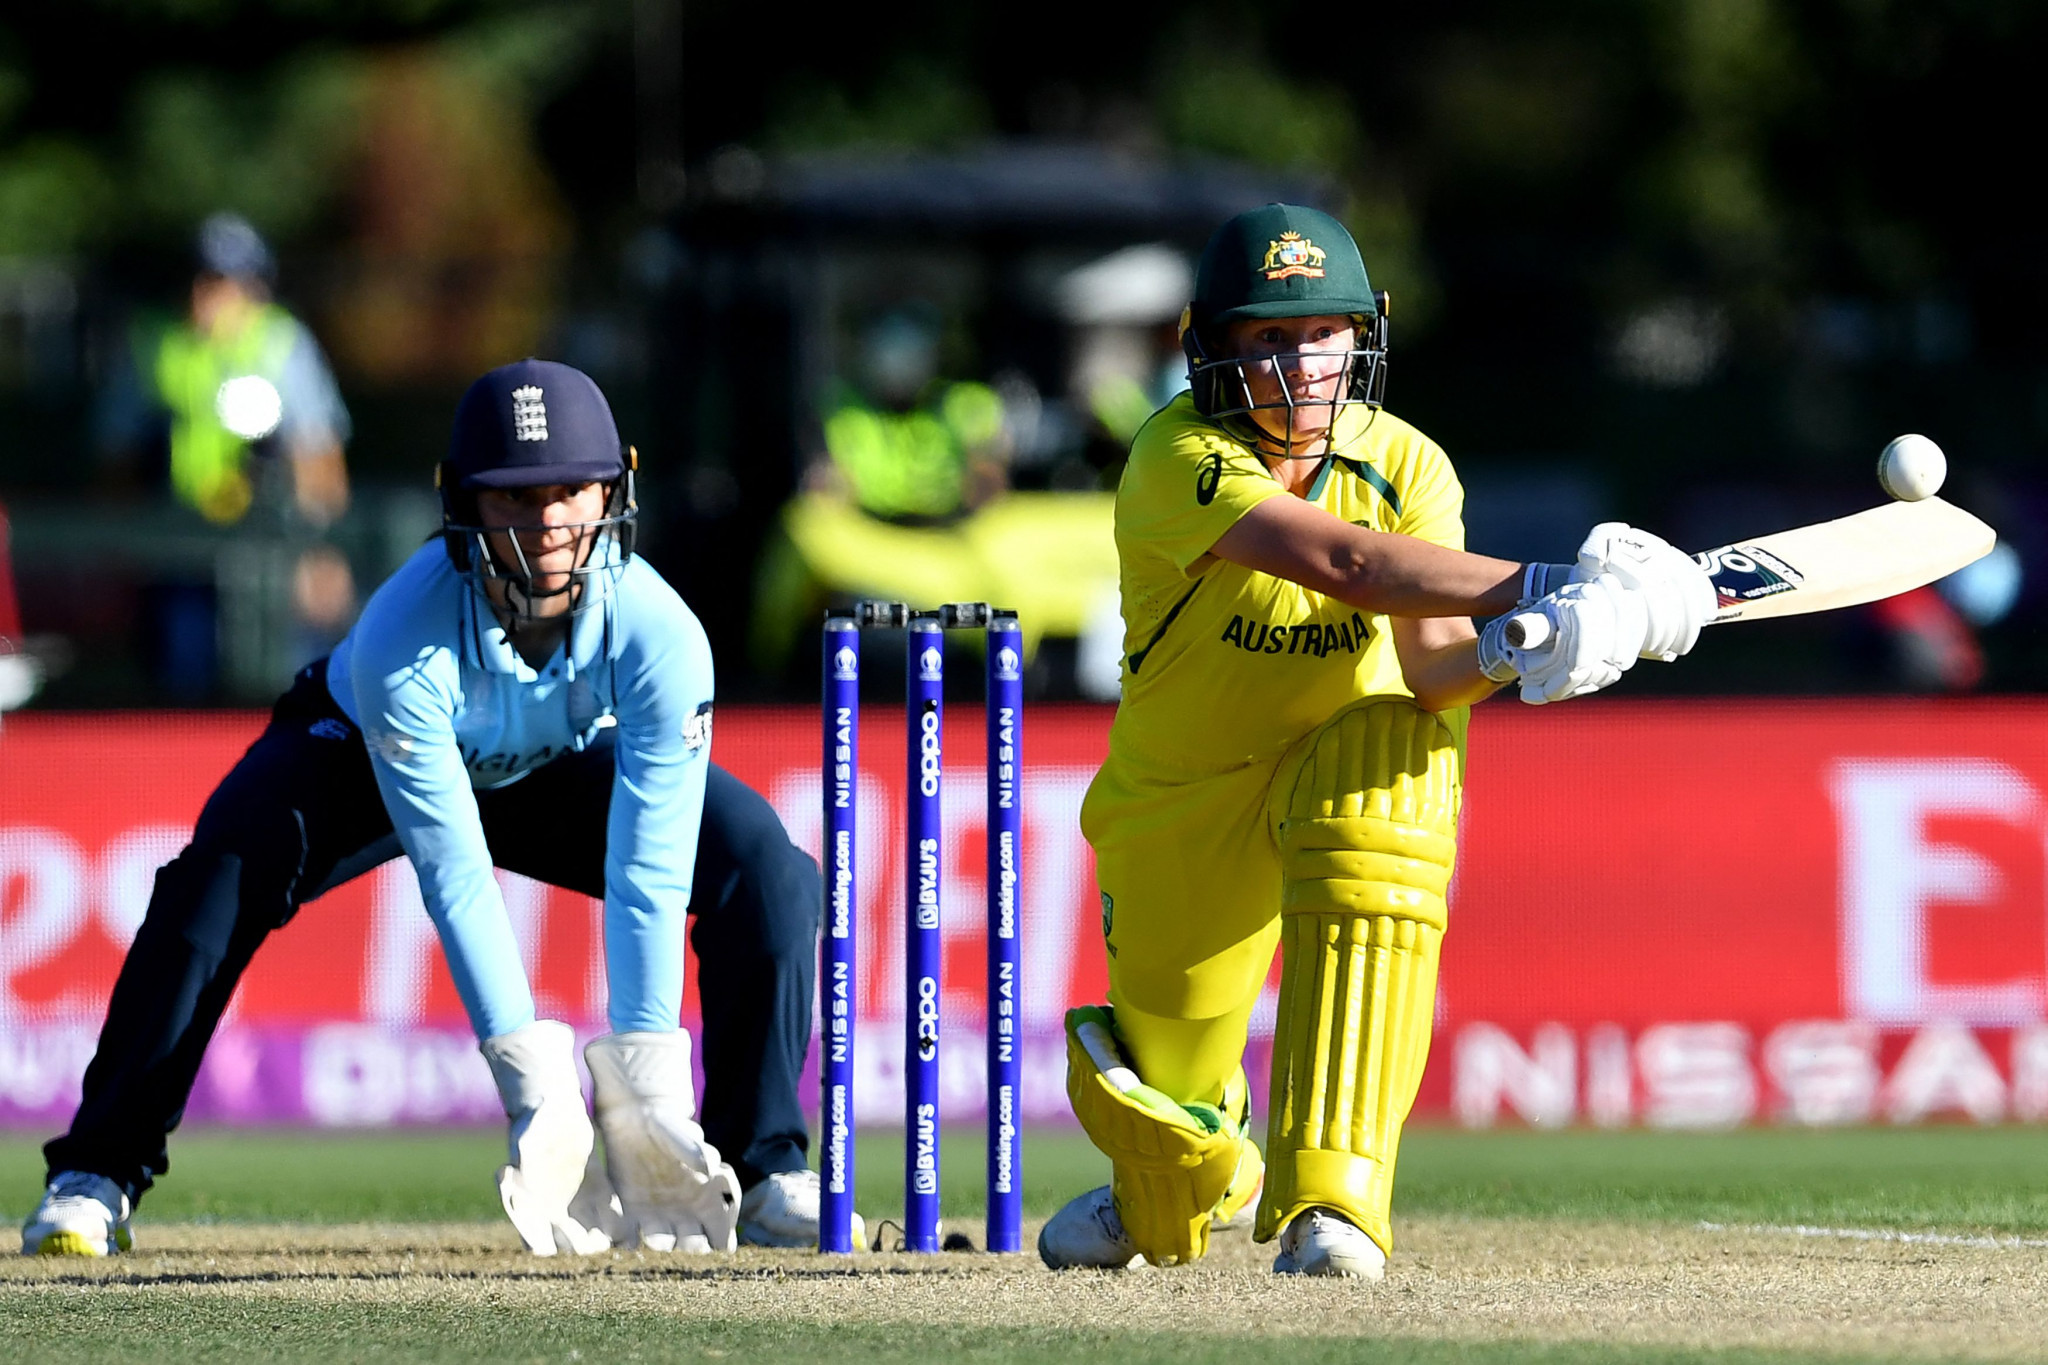 Alyssa Healy was player of the tournament at the Women's Cricket World Cup in New Zealand ©Getty Images